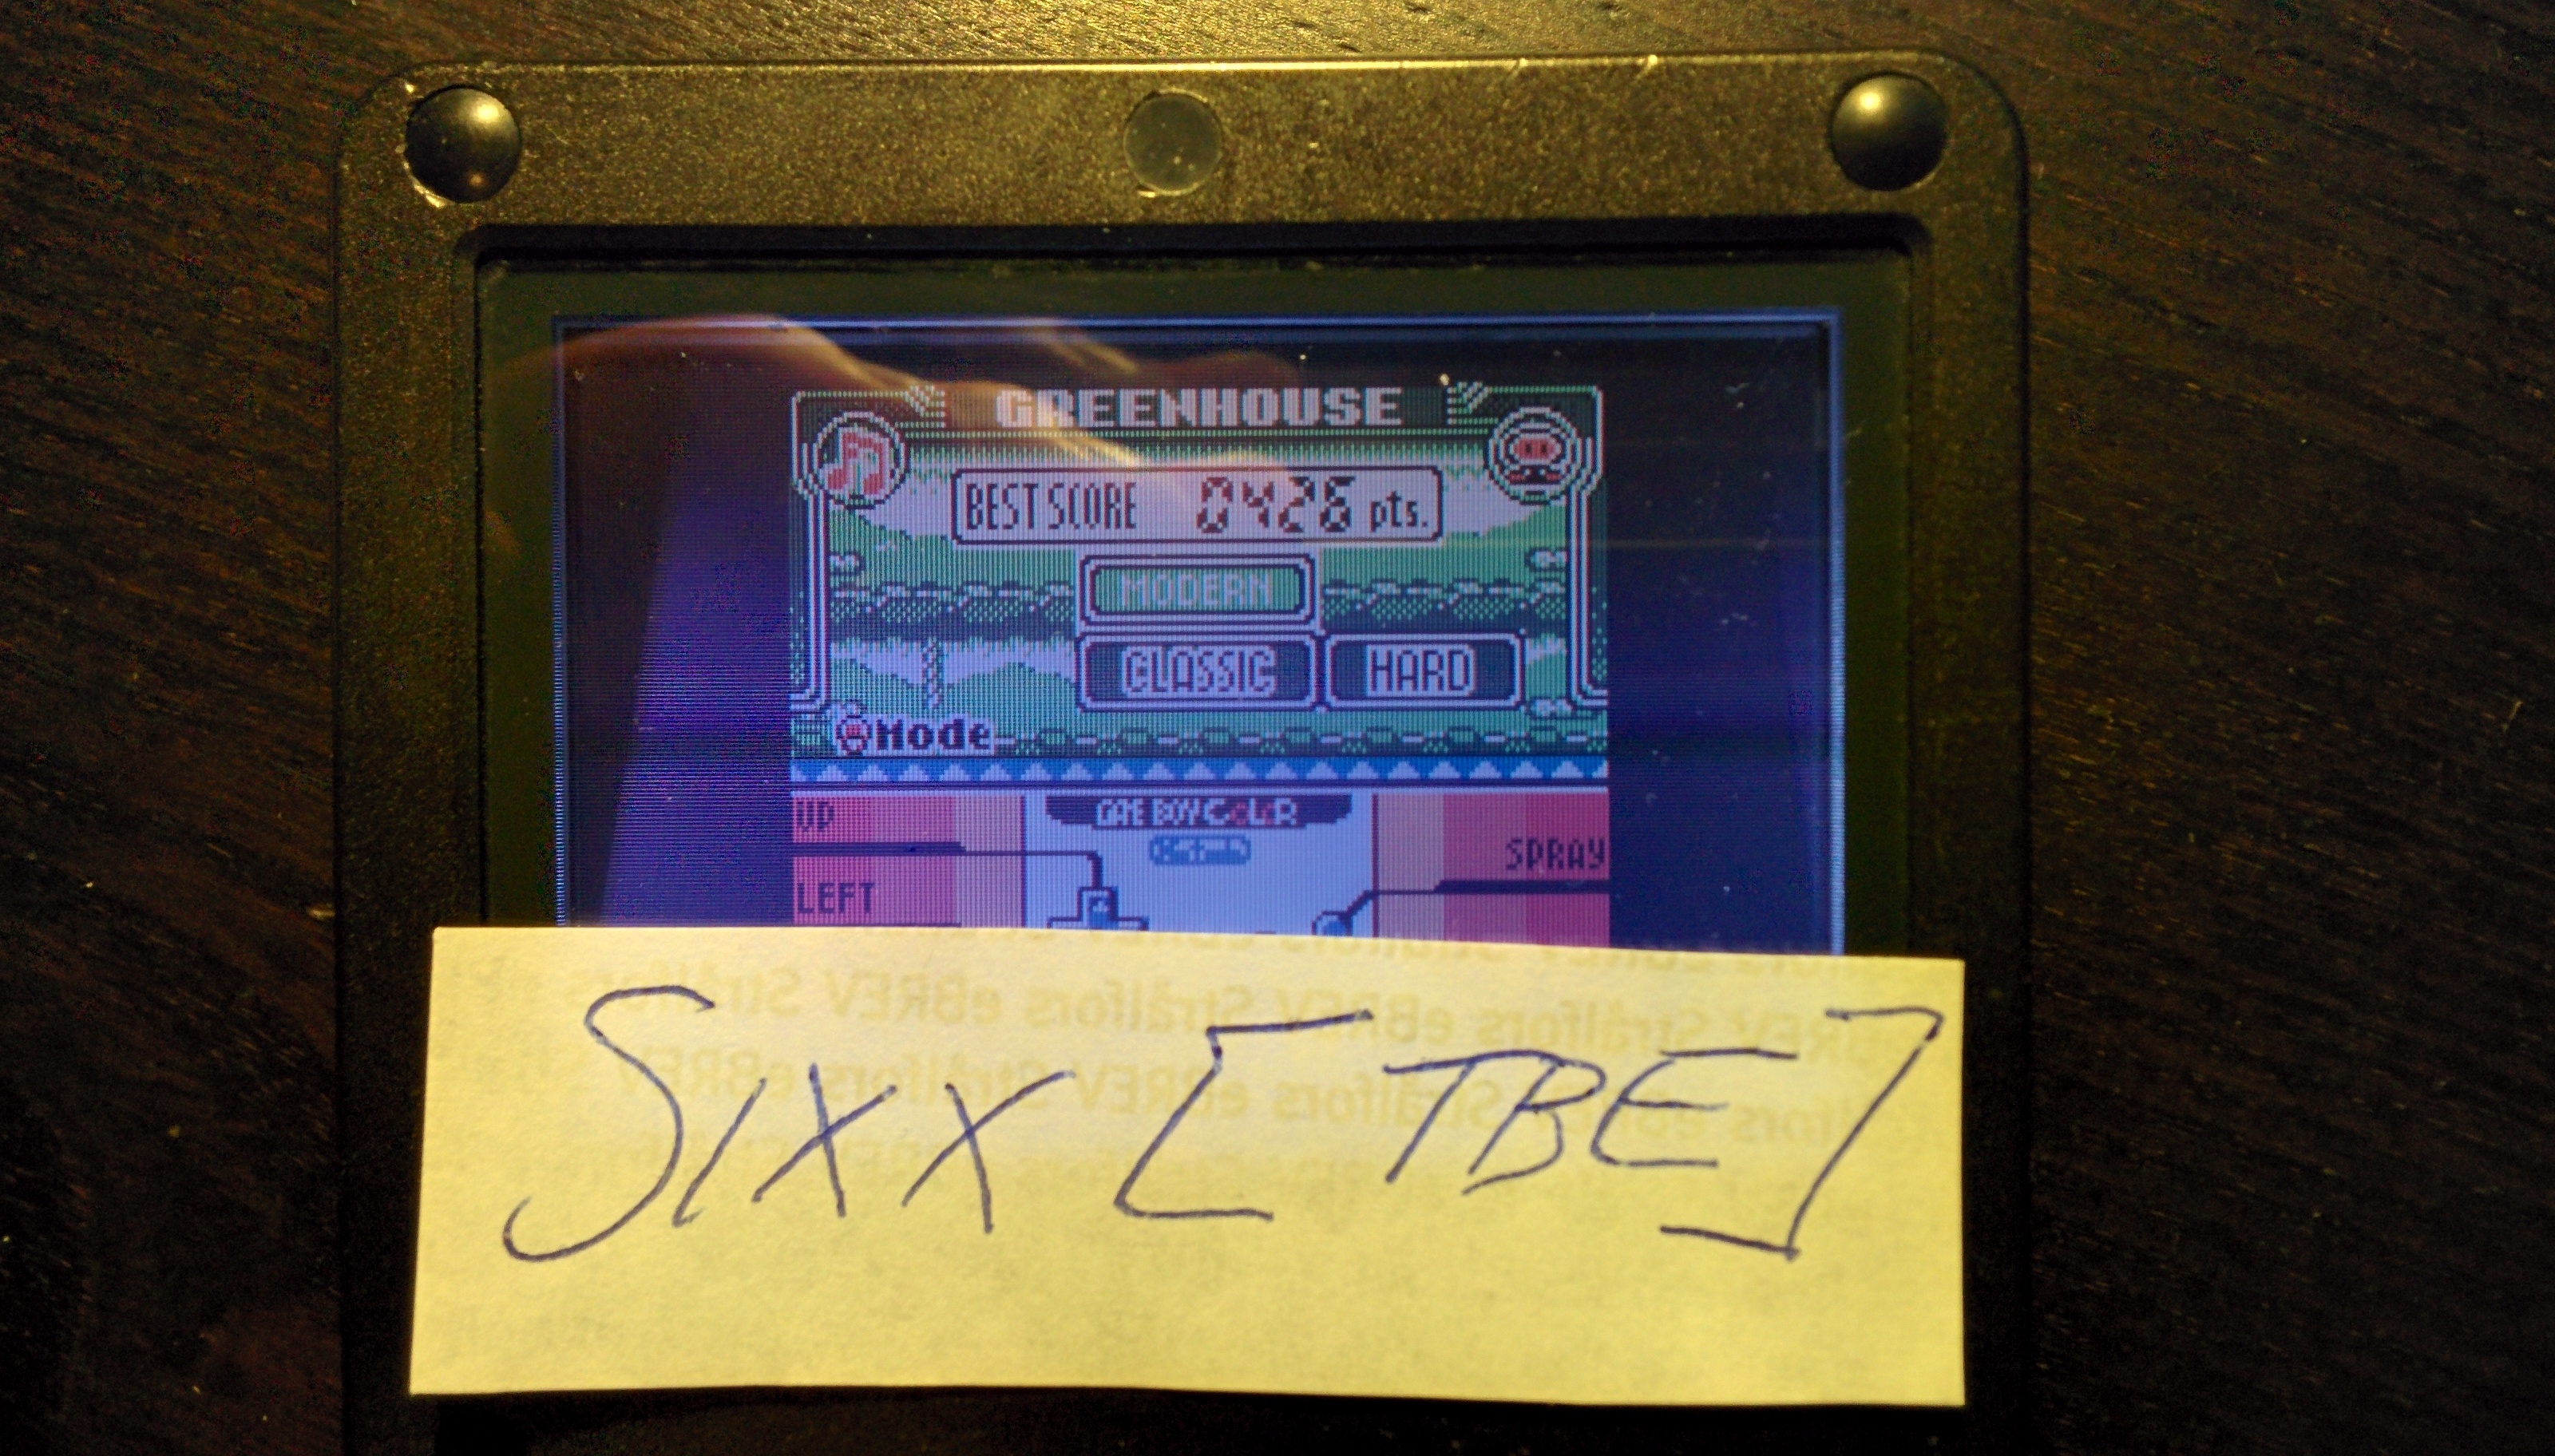 Sixx: Game & Watch Gallery 3: Greenhouse: Classic: Hard (Game Boy Color) 426 points on 2014-09-01 16:18:21